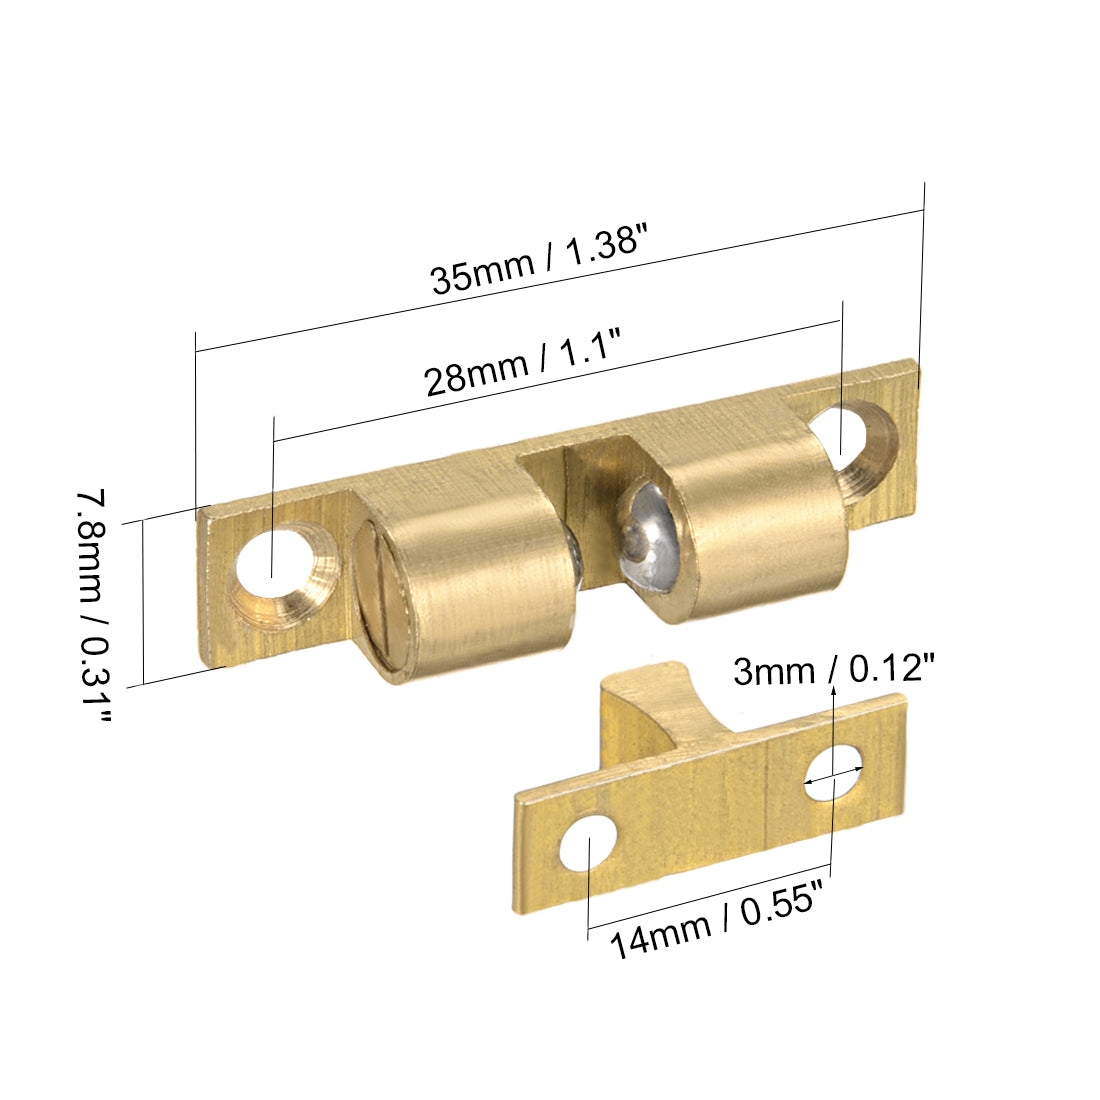 Uxcell Uxcell Cabinet Door Closet Brass Double Ball Catch Tension Latch 35mm Length Gold Tone